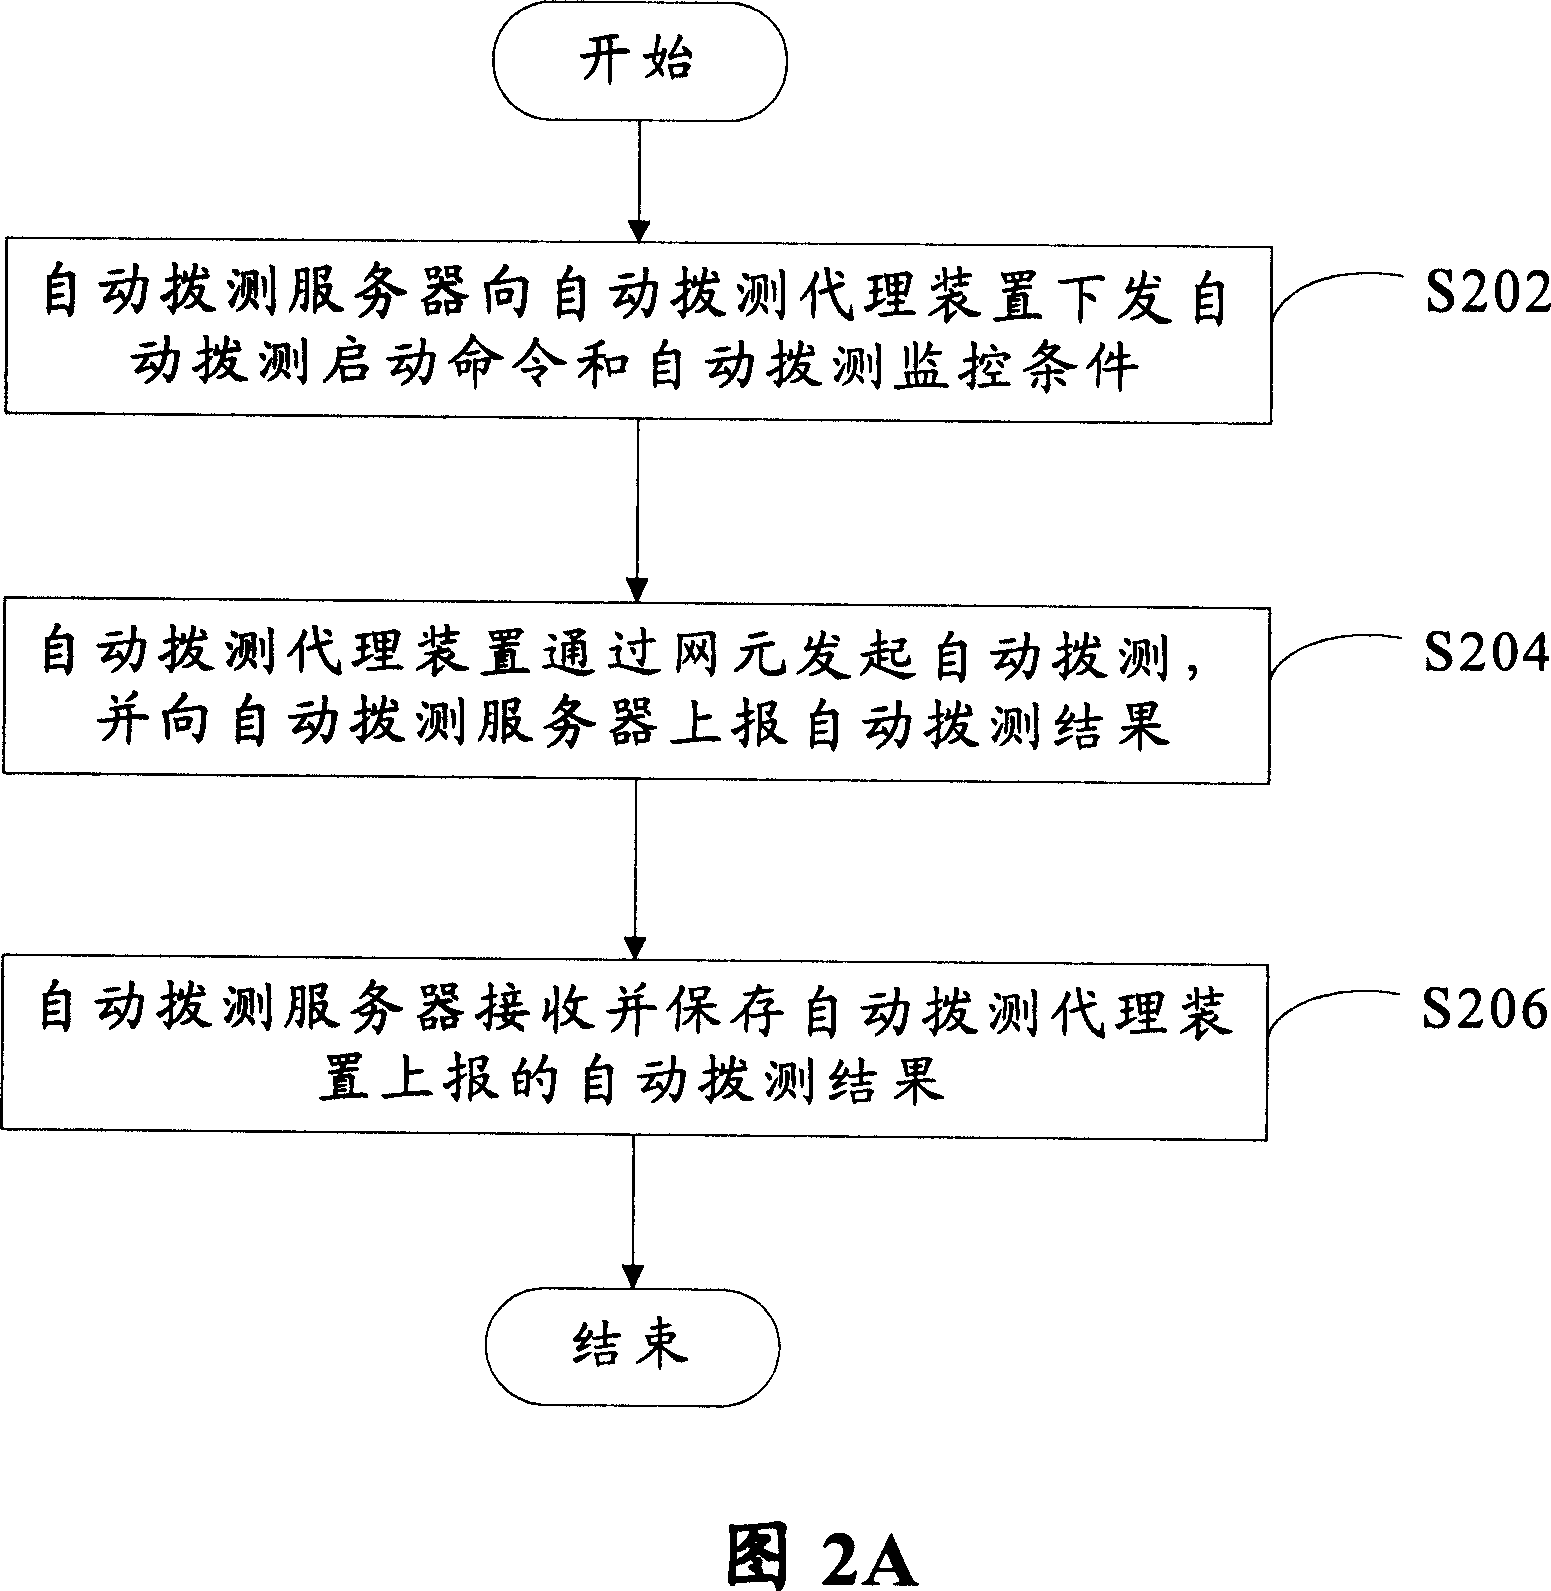 Automatic test system and method